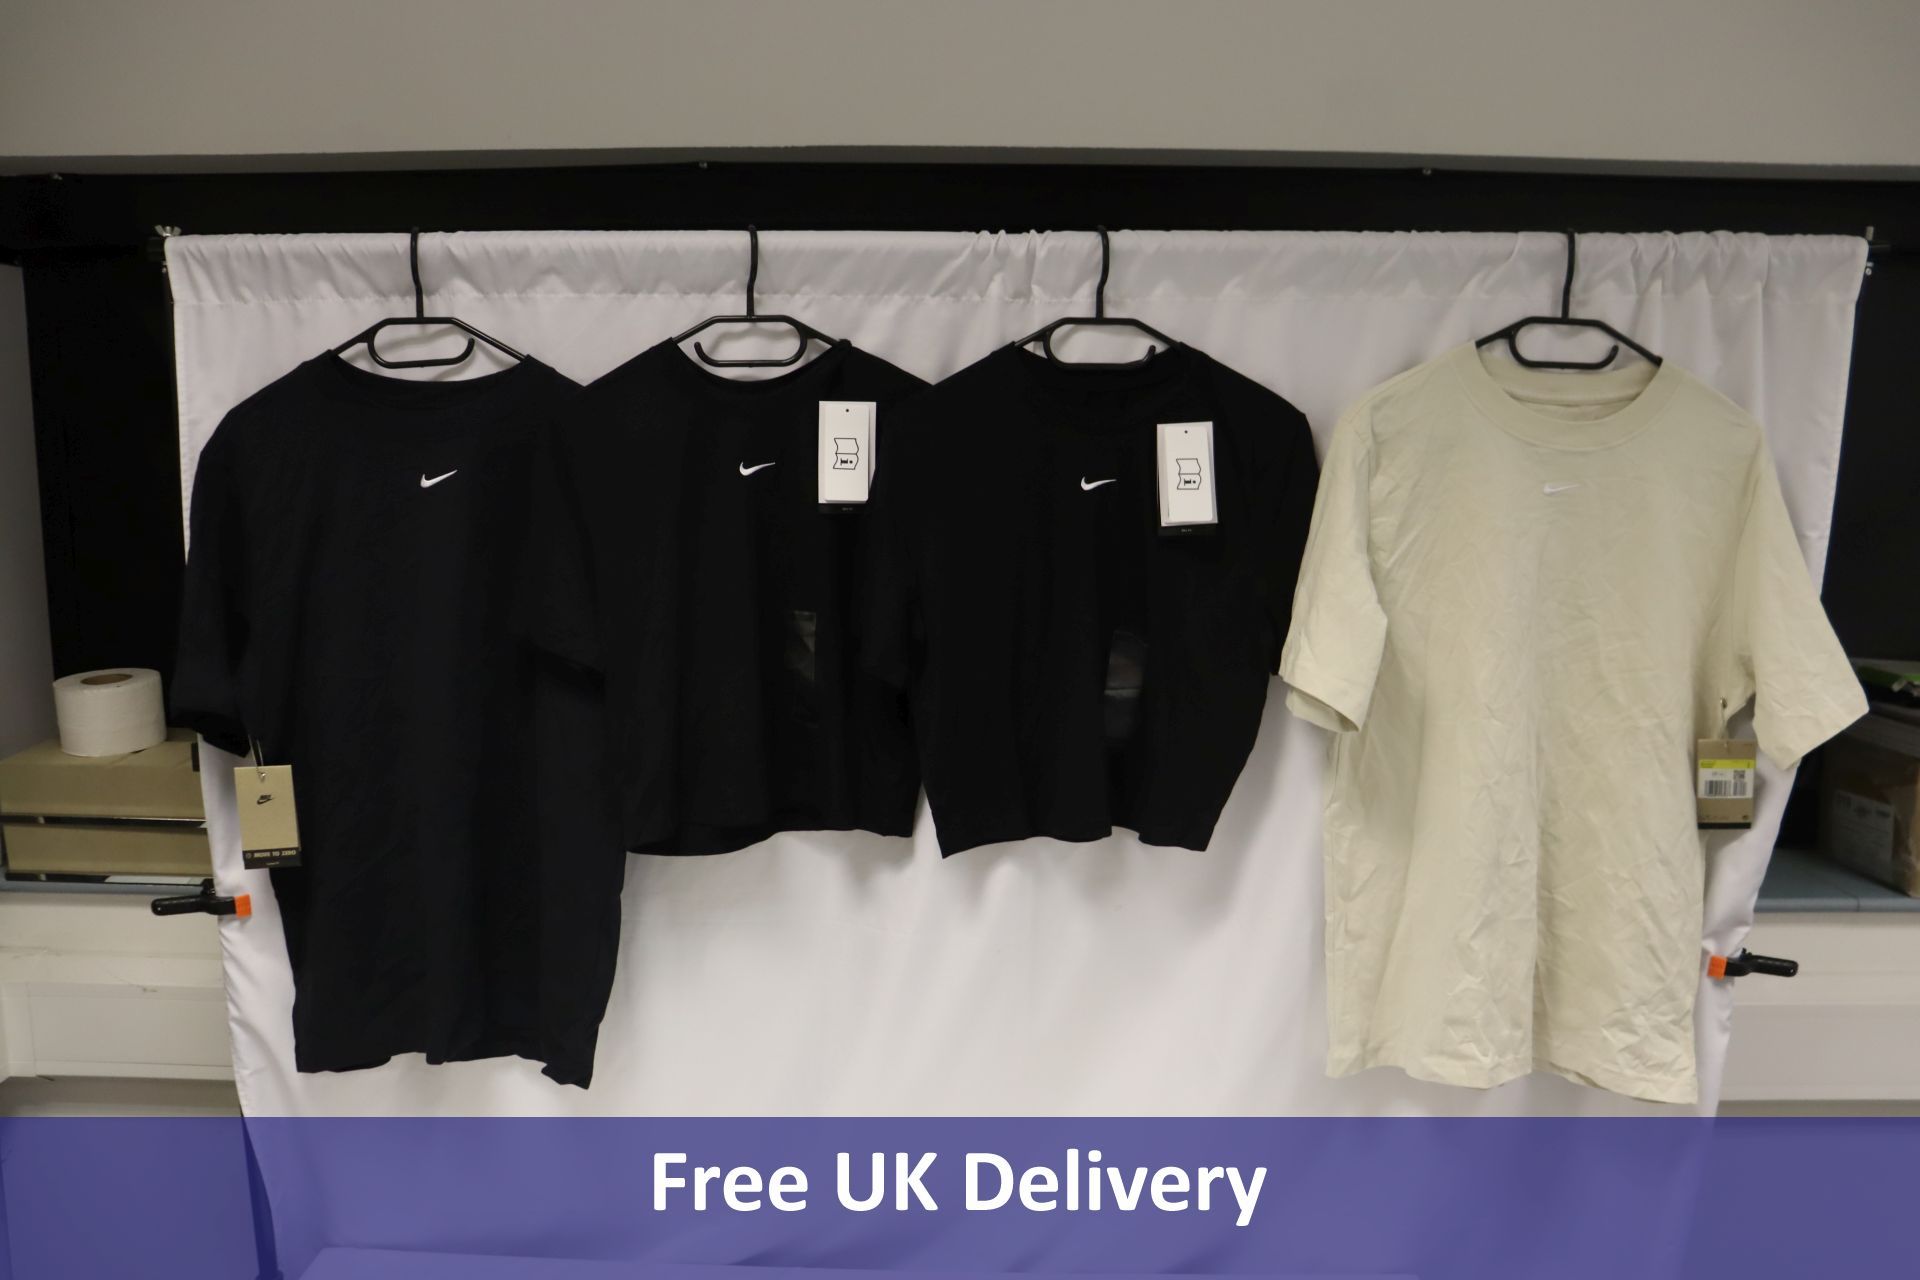 Four Nike items to include 2x Essential Women's Slim Cropped T-Shirt, Black, Large, 2x Essential Wom